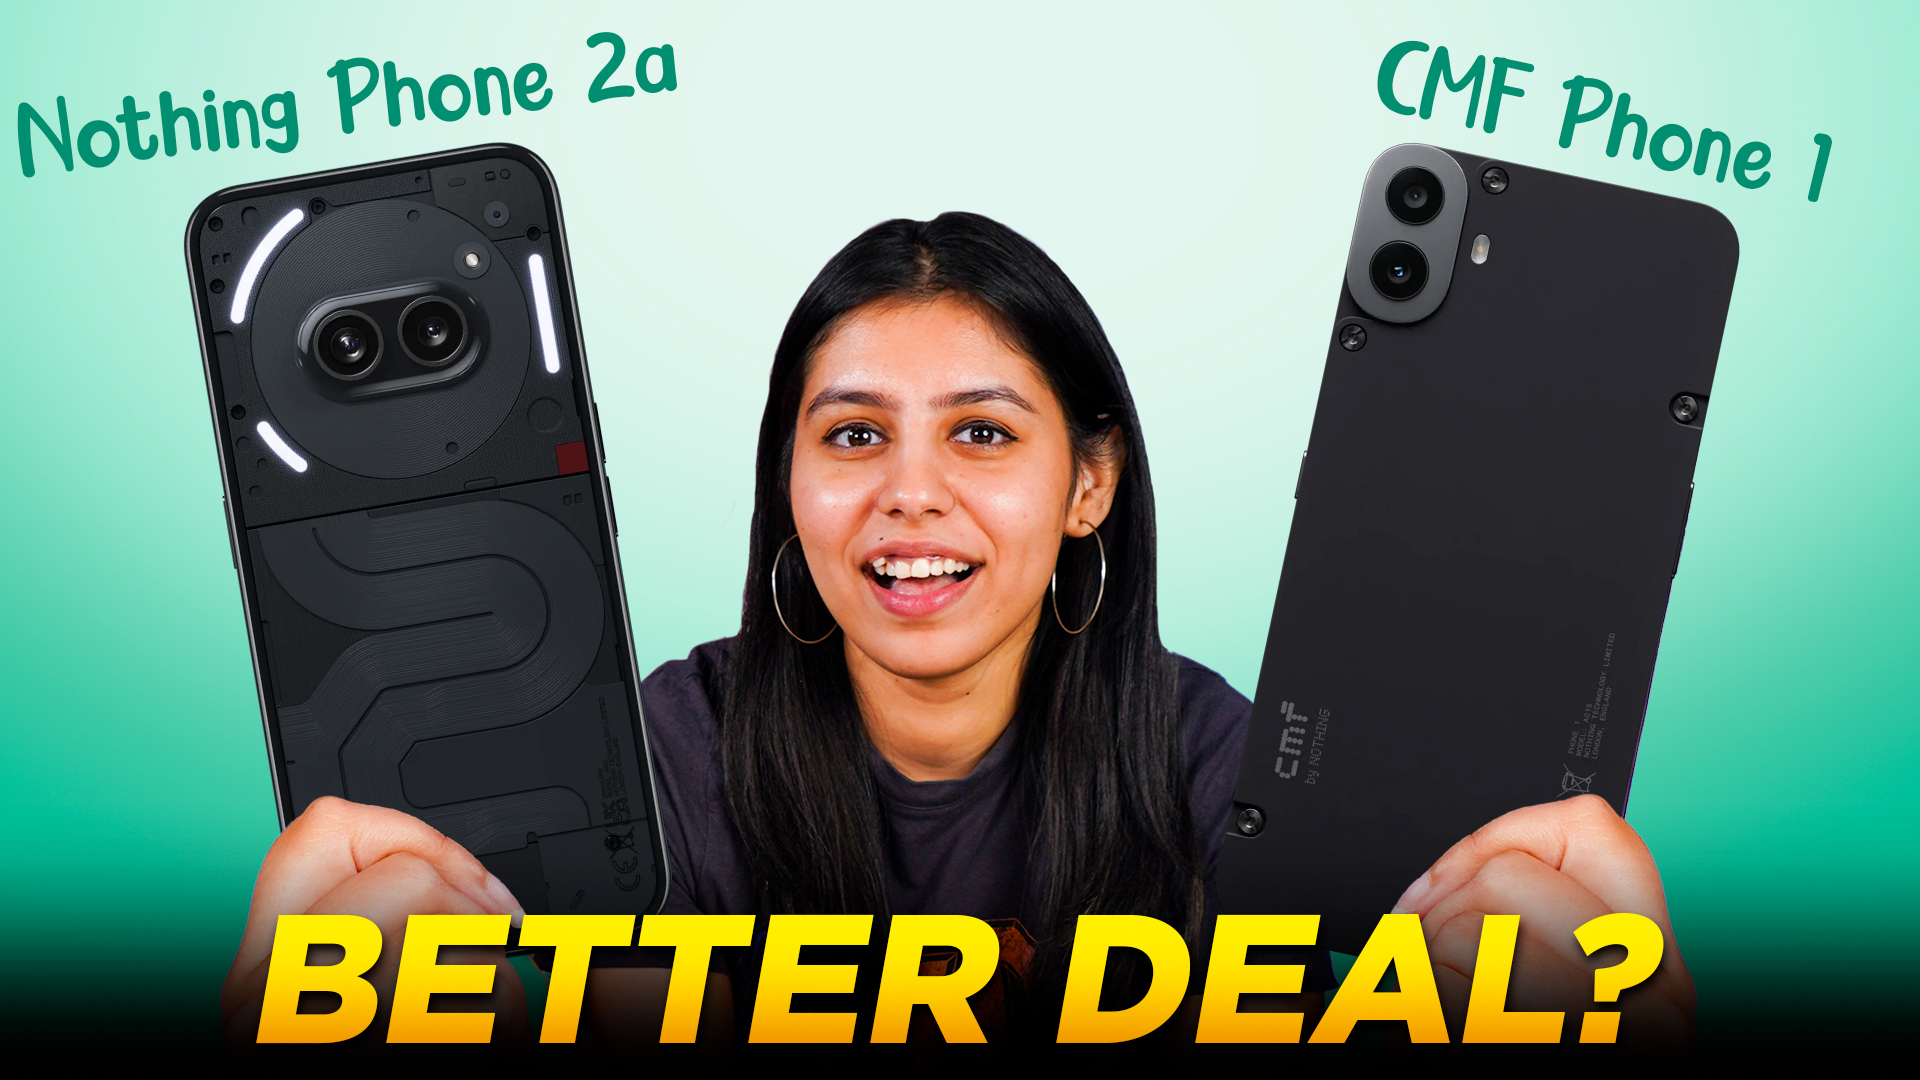 CMF Phone 1 vs Nothing Phone 2a full comparison in Hindi Which one to buy